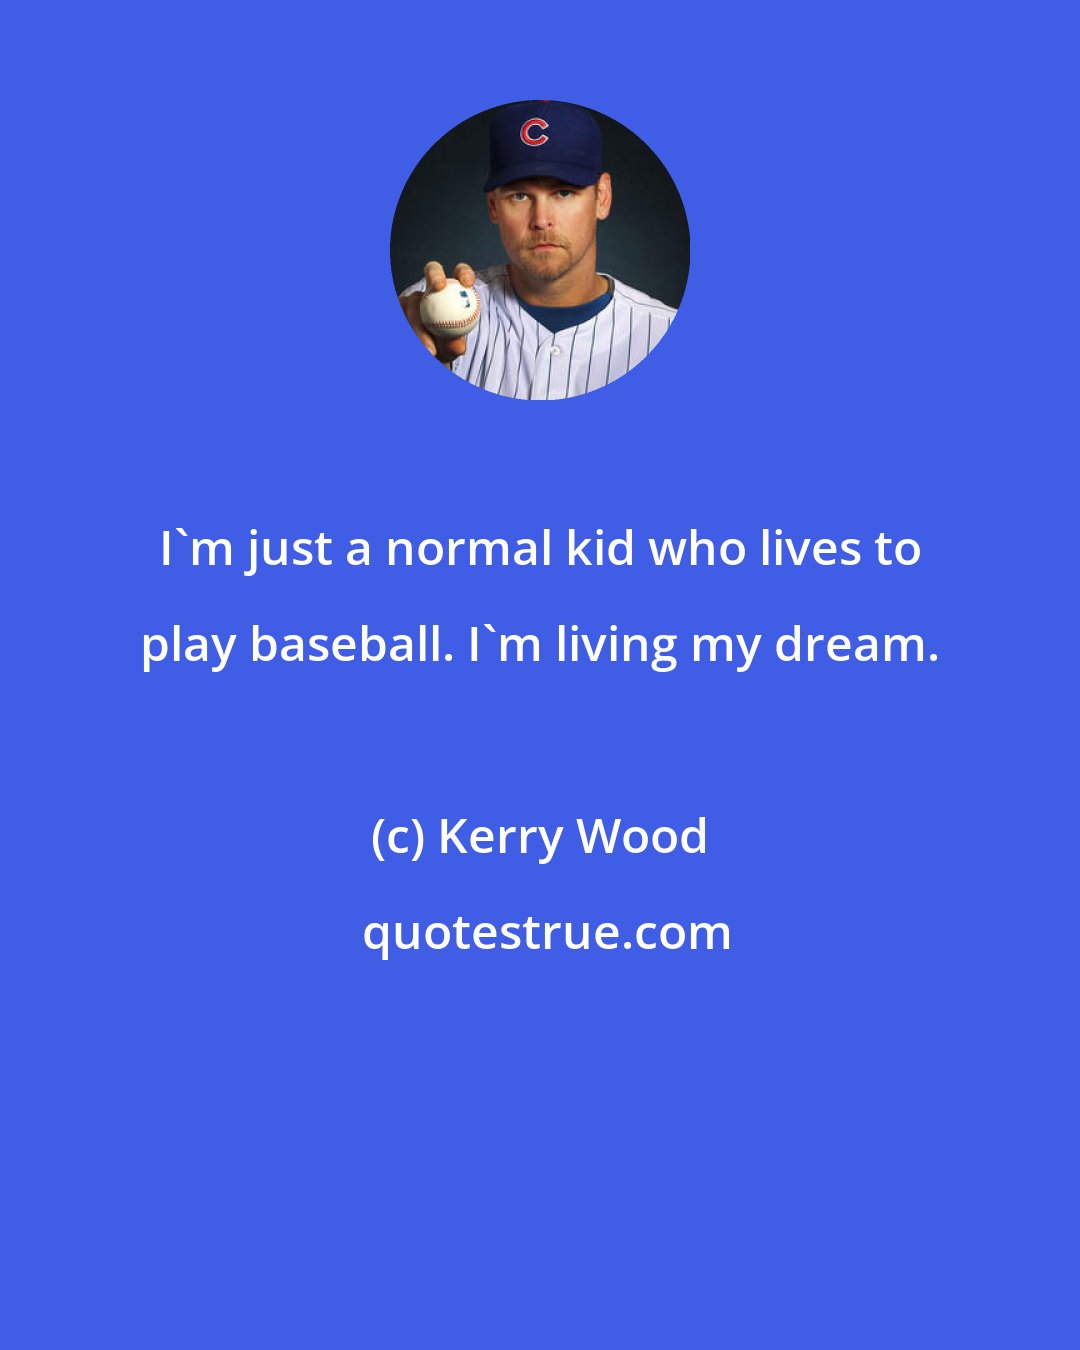 Kerry Wood: I'm just a normal kid who lives to play baseball. I'm living my dream.